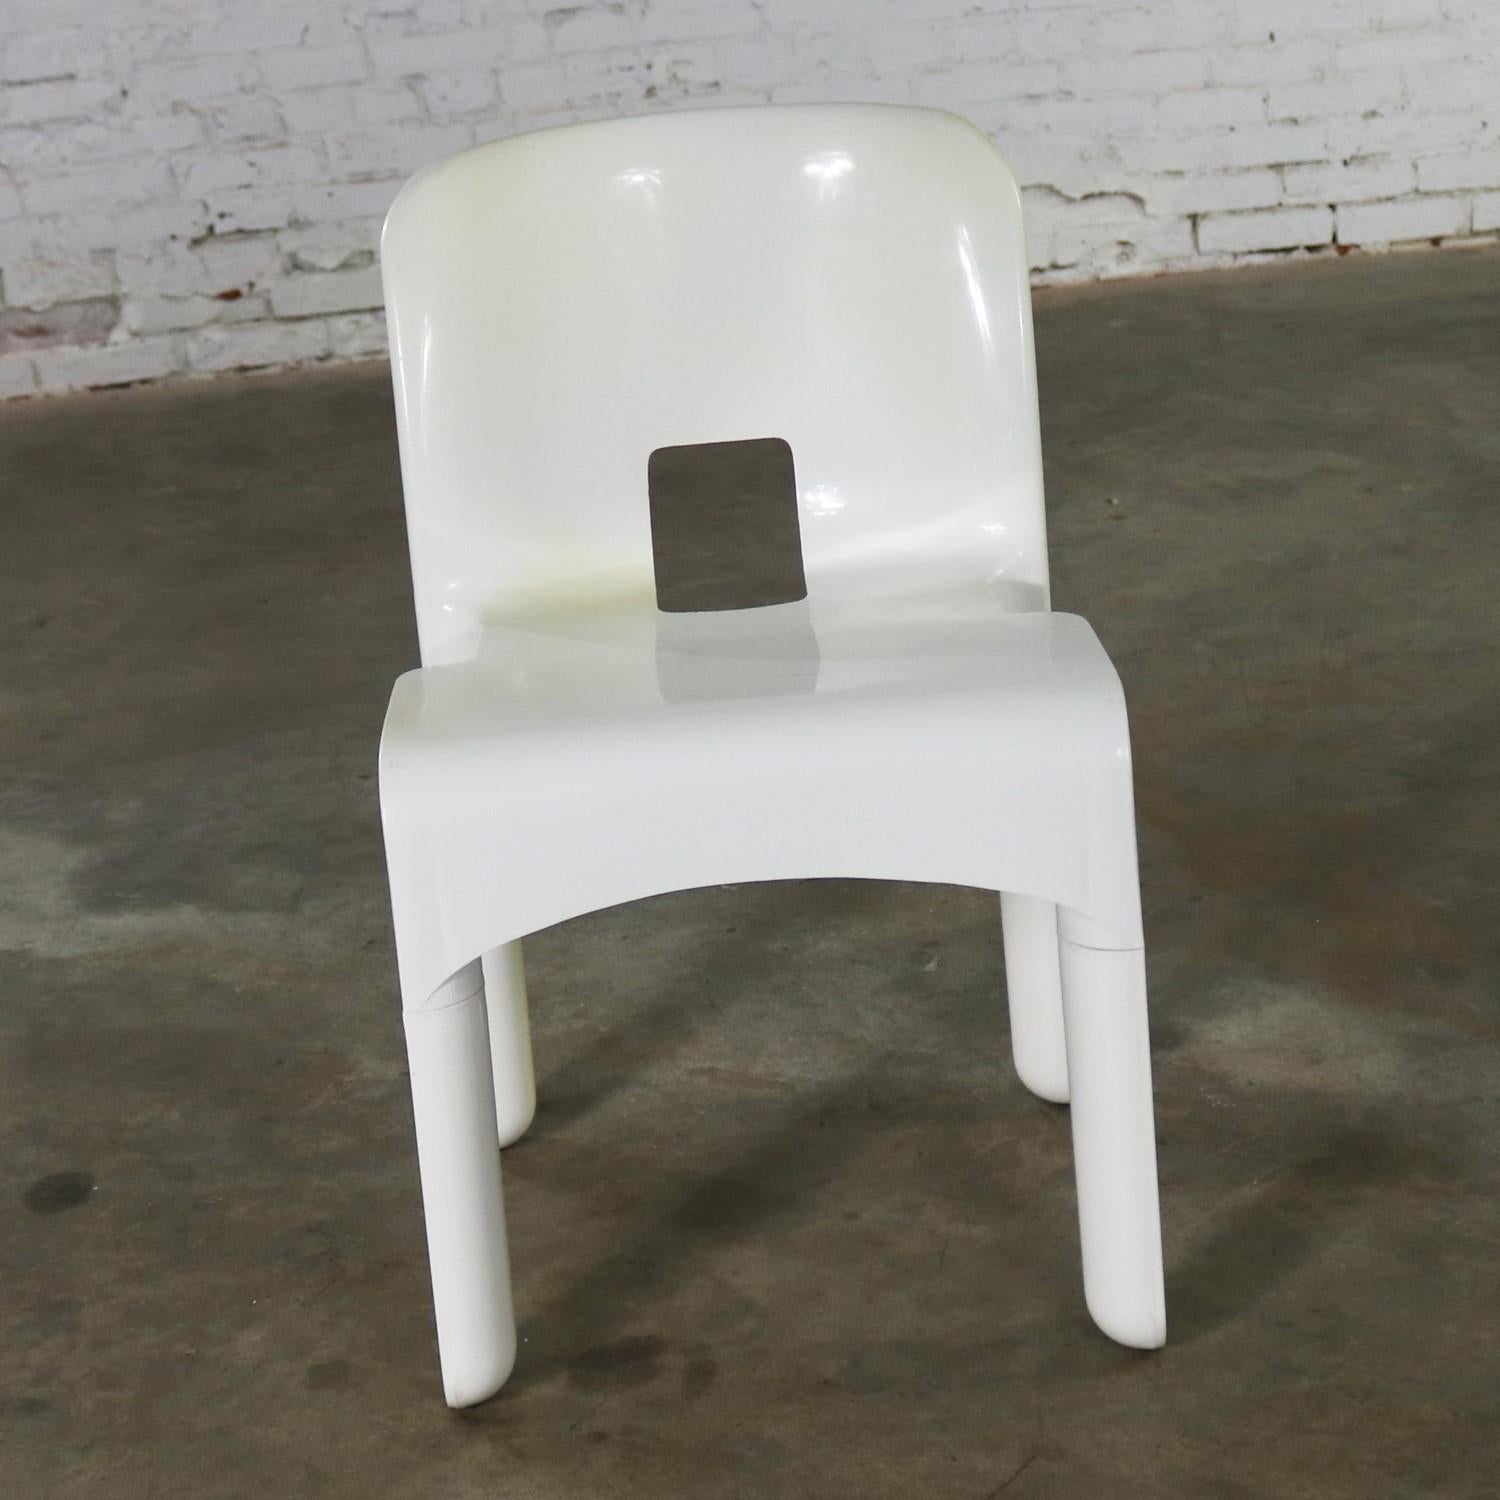 Available now this landmark Sedia Universale 4867 injection molded plastic chair designed by Joe Columbo for Kartell. This chair is in wonderful vintage condition. There is a small area on one side of the bend in the back of the seat that has some